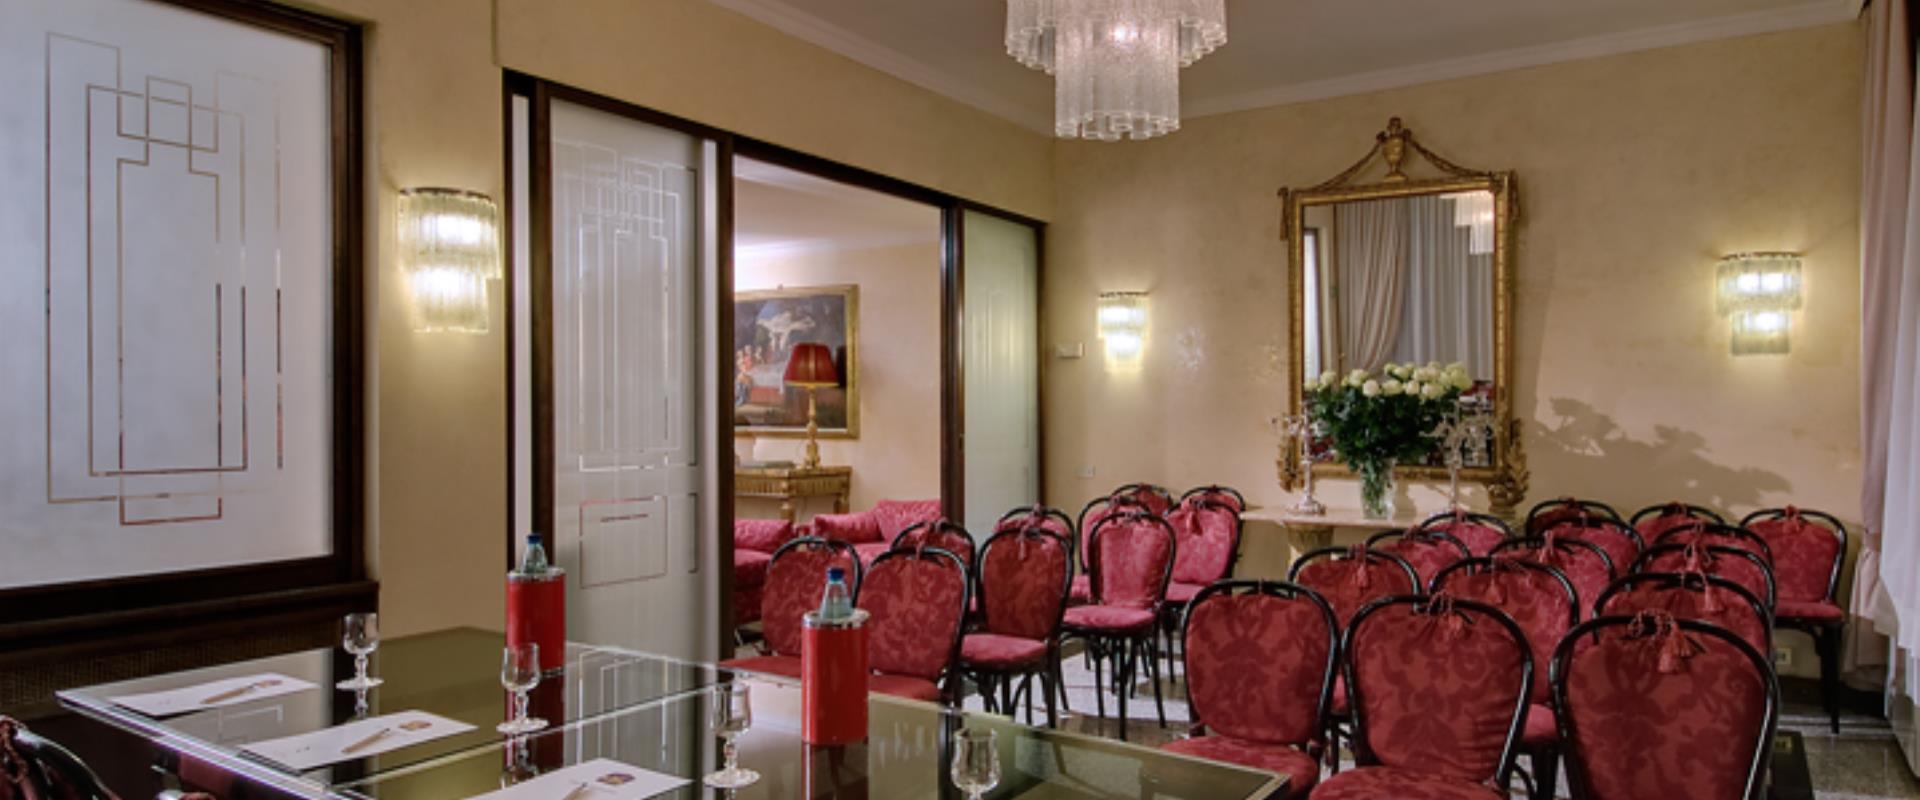 A hall meetings, conferences at the Best Western Hotel Rivoli 4-star Rome